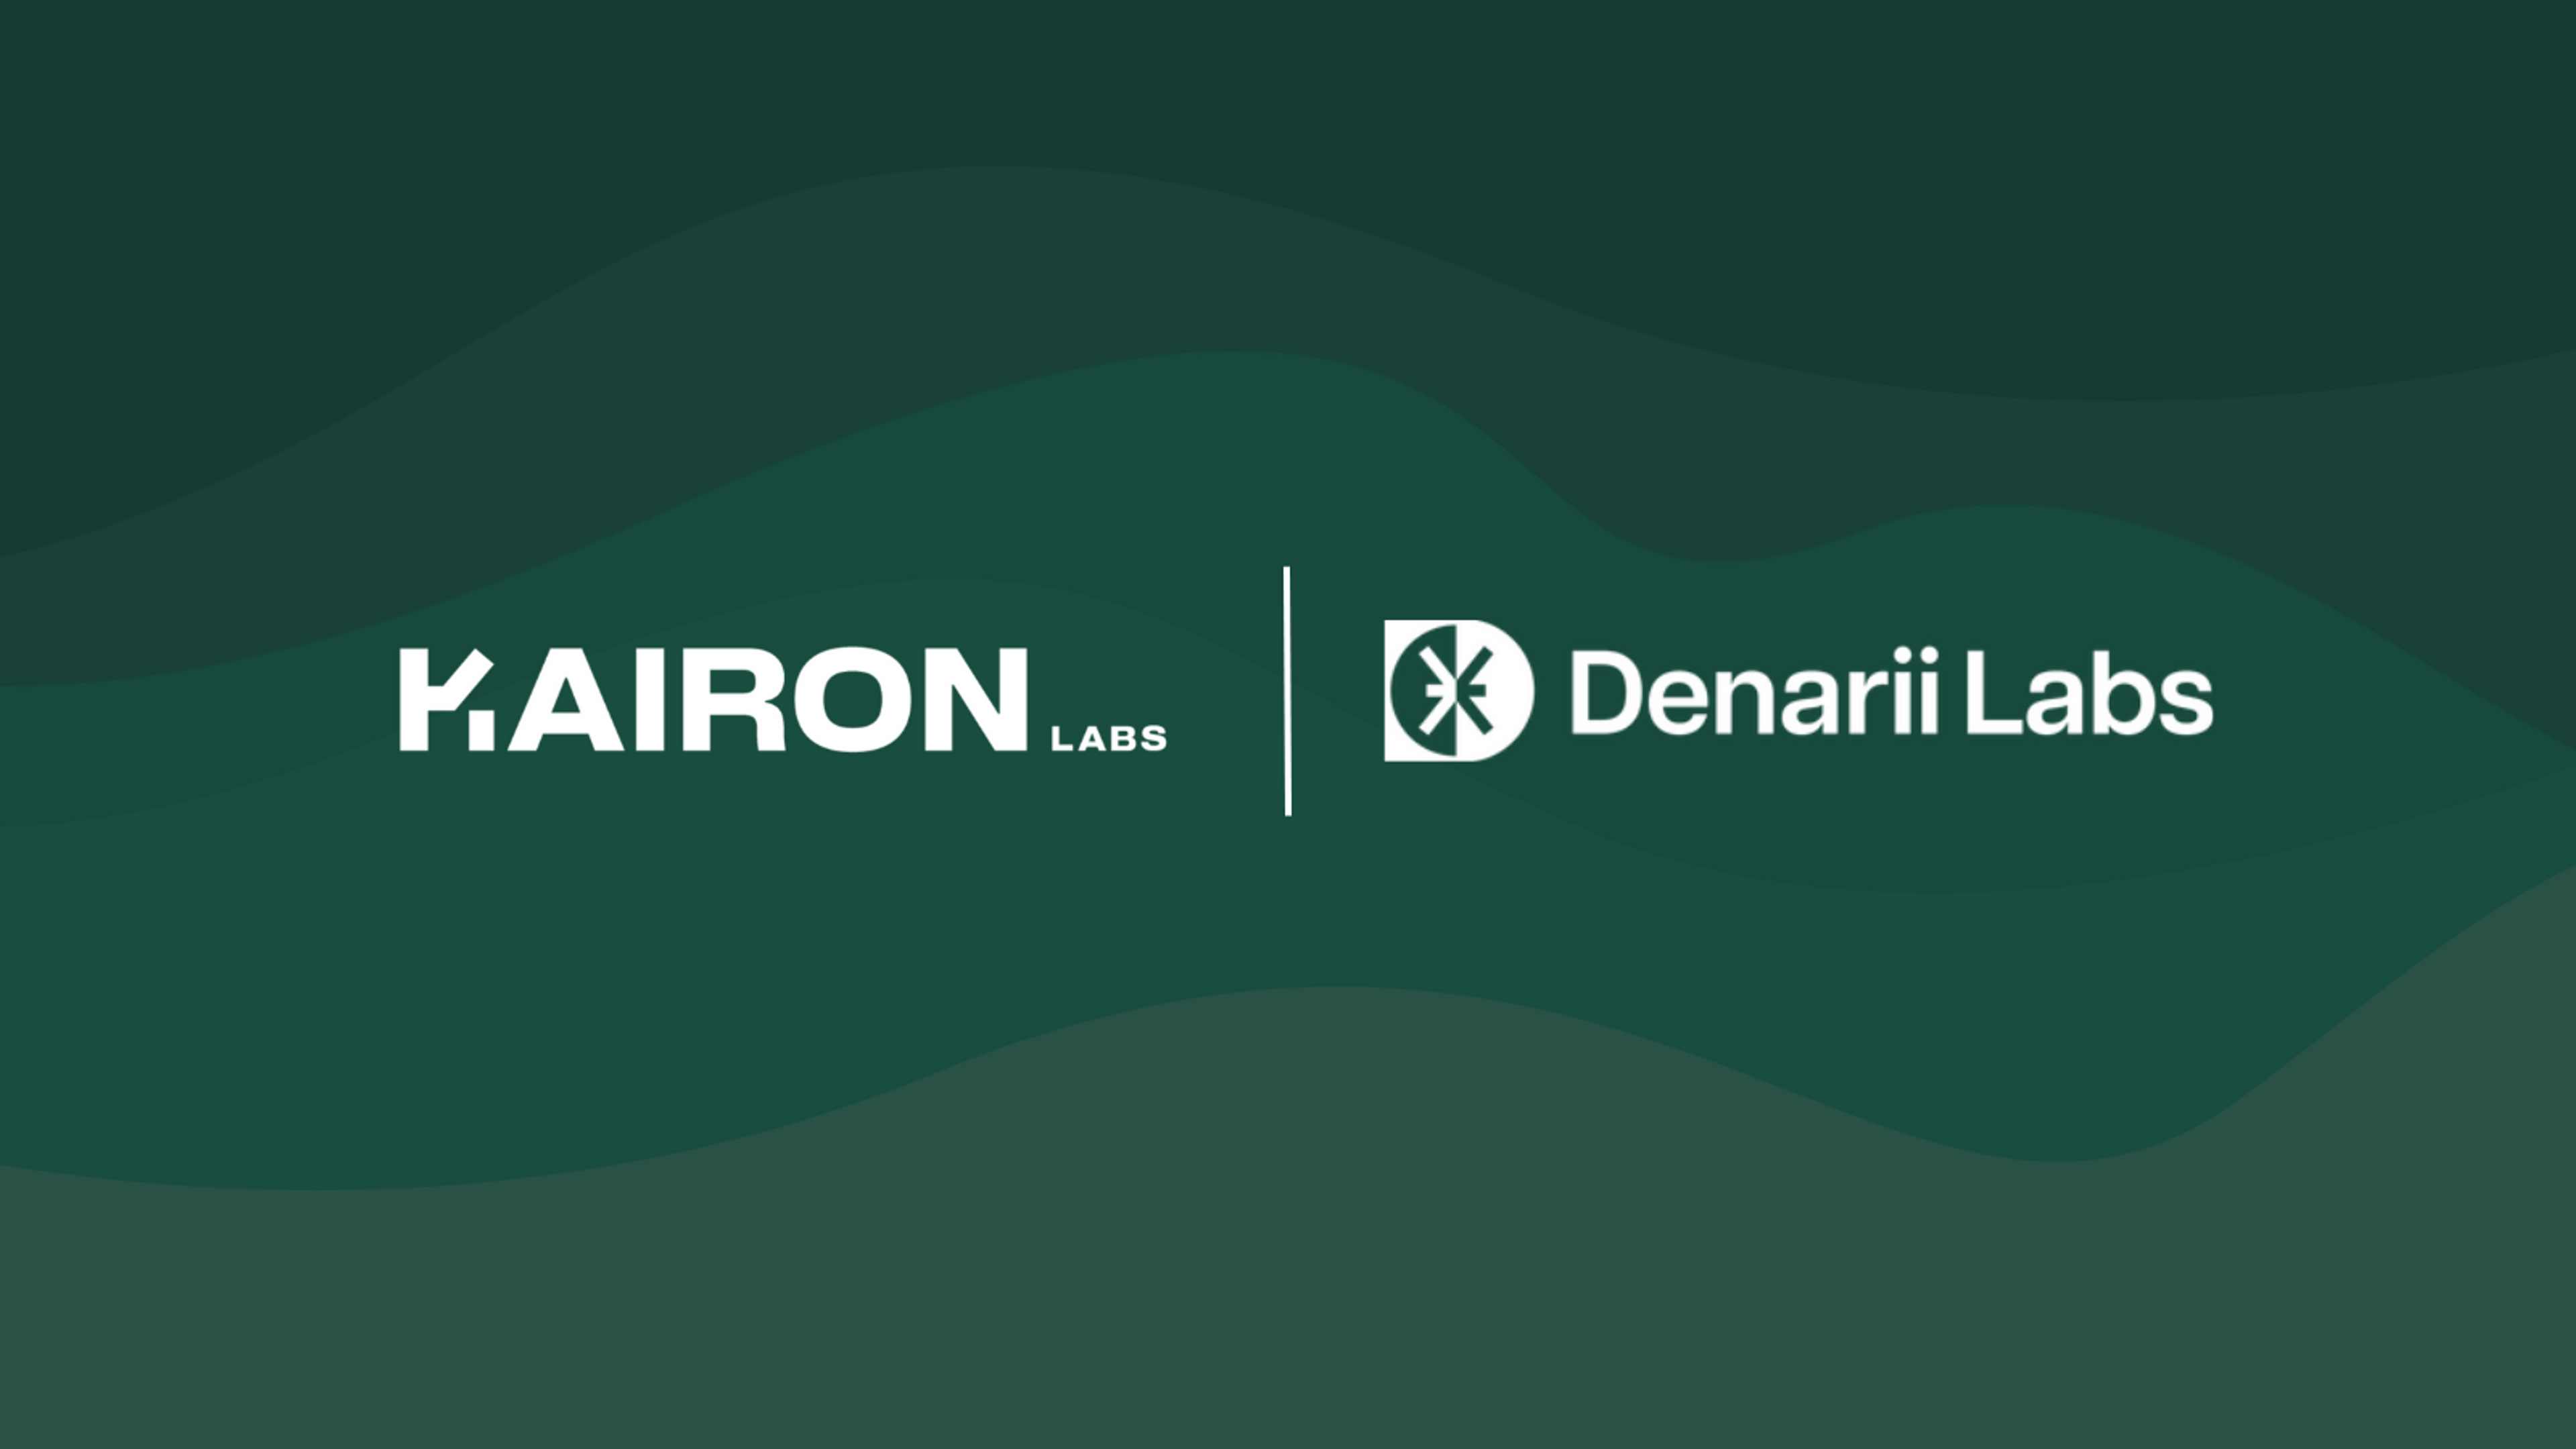 Kairon Labs Partners with Denarii Labs for Inaugural Accelerator Program